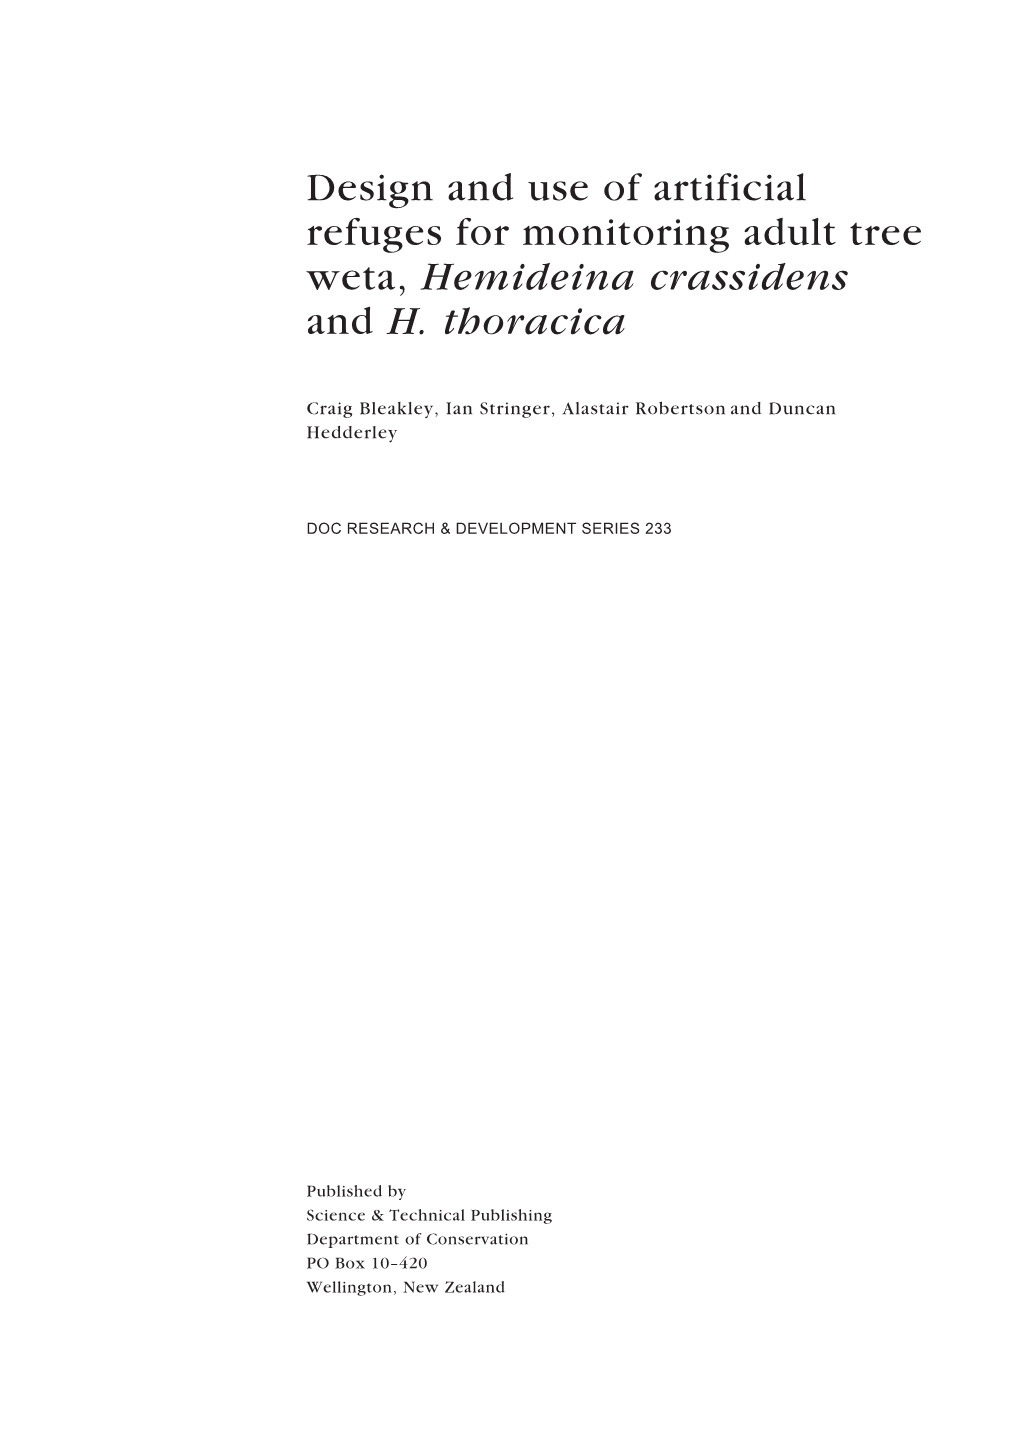 Design and Use of Artificial Refuges for Monitoring Adult Tree Weta, Hemideina Crassidens and H